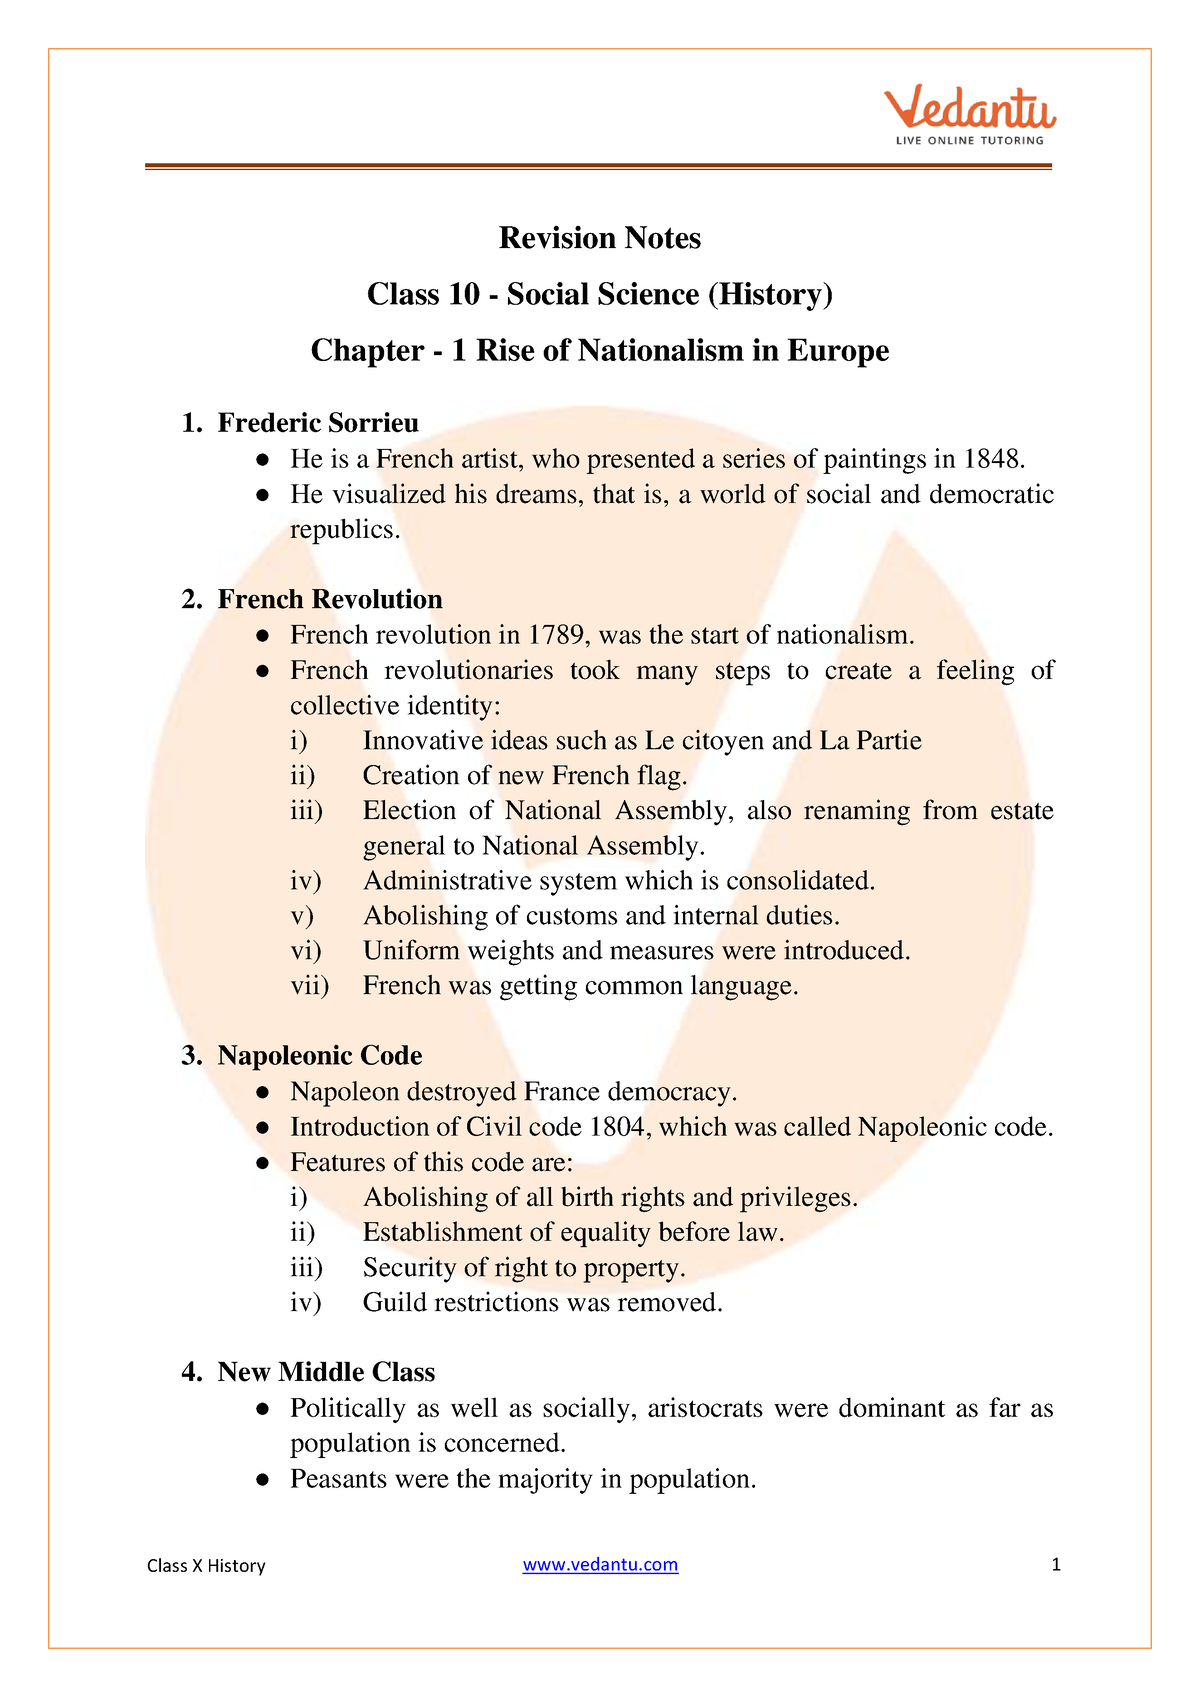 The Rise of Nationalism in Europe Class 10 Important Questions and Answers  - CBSE Guidance